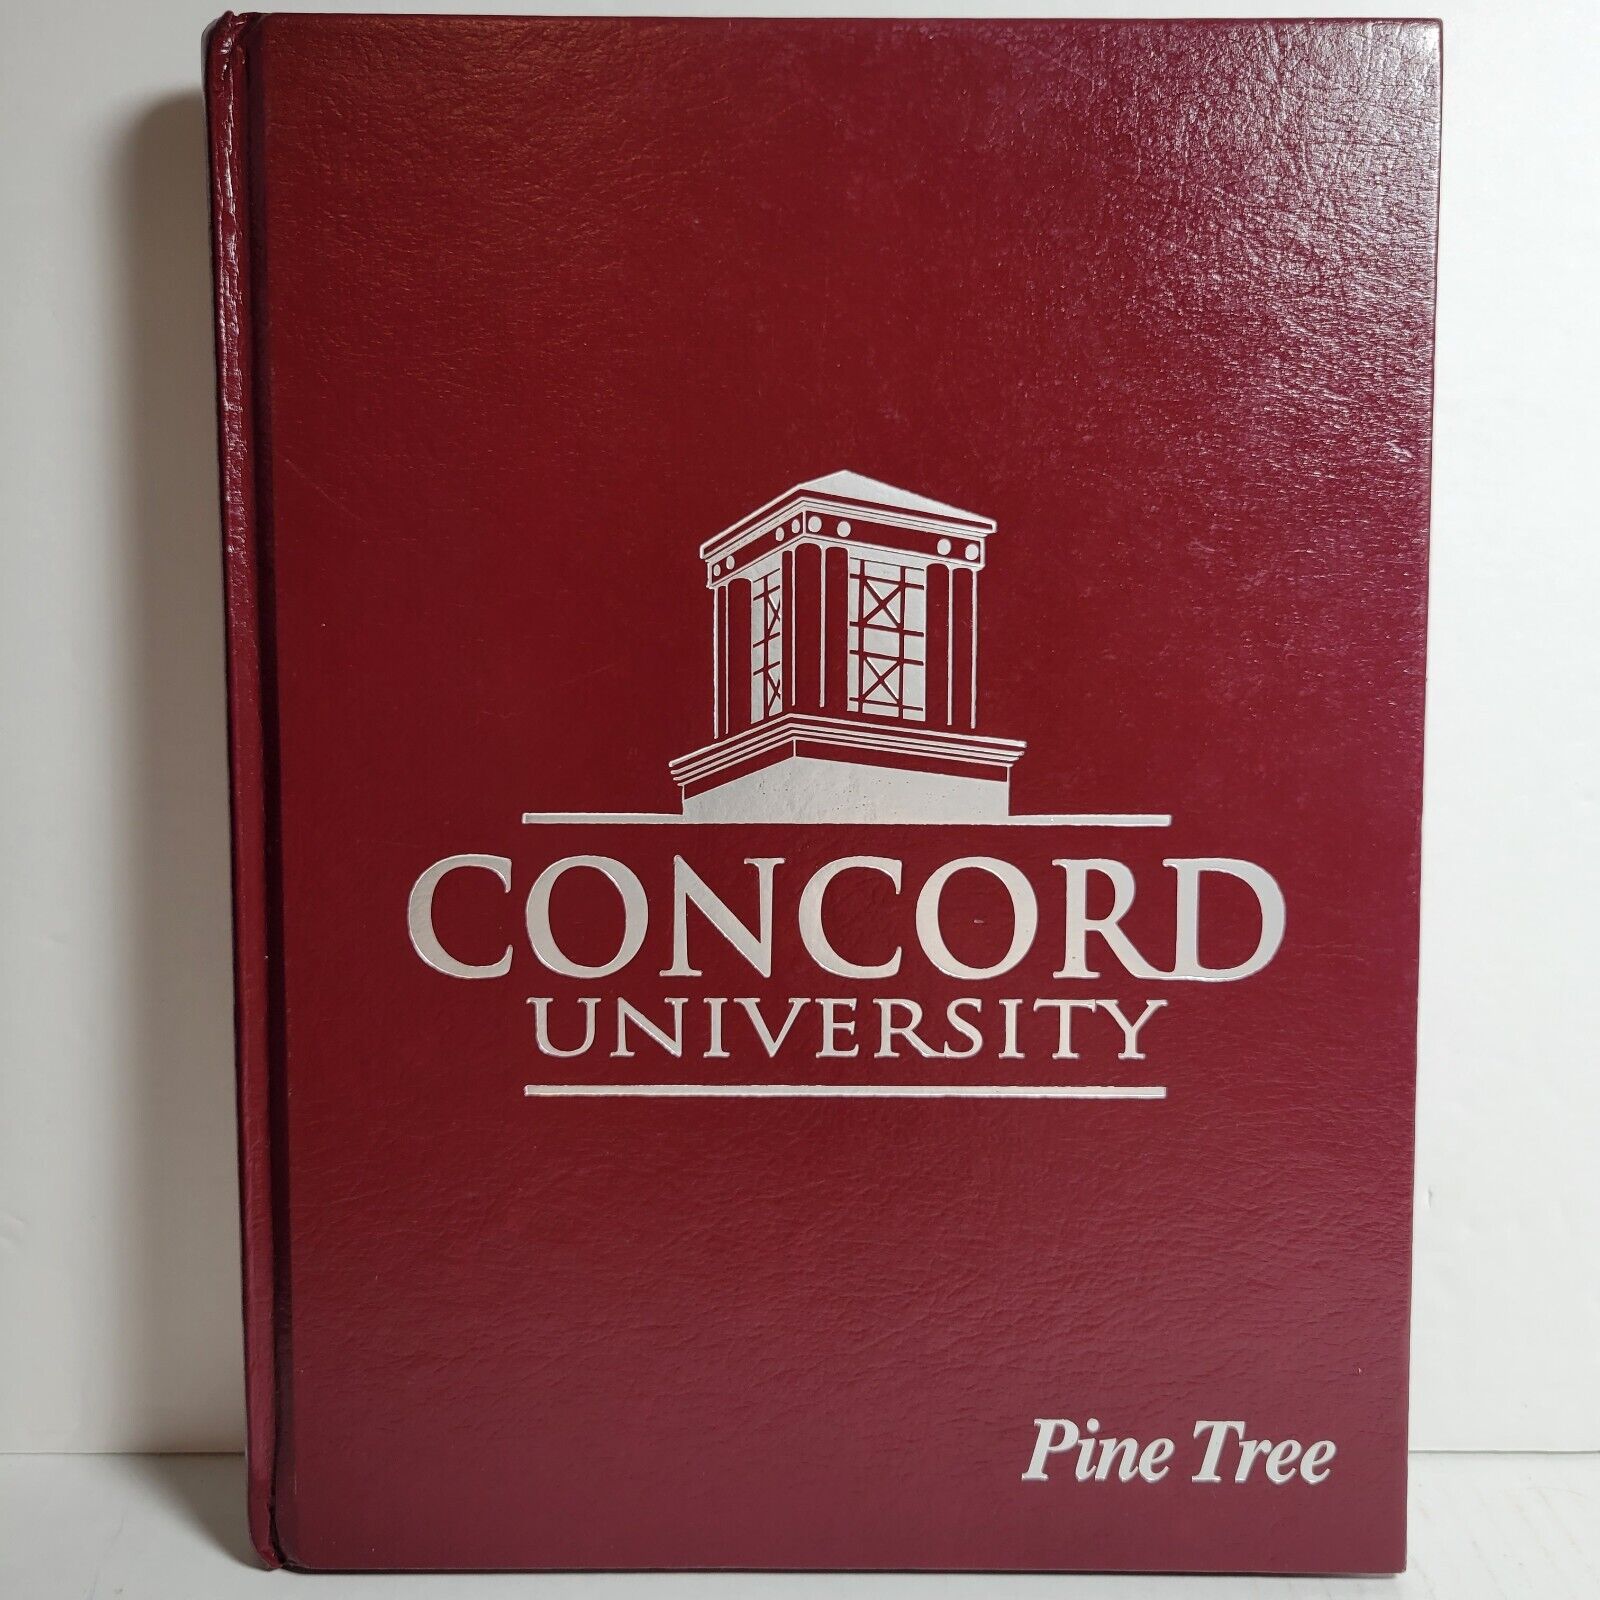 2009 Concord University College Athens WV Pine Tree Yearbook Annual